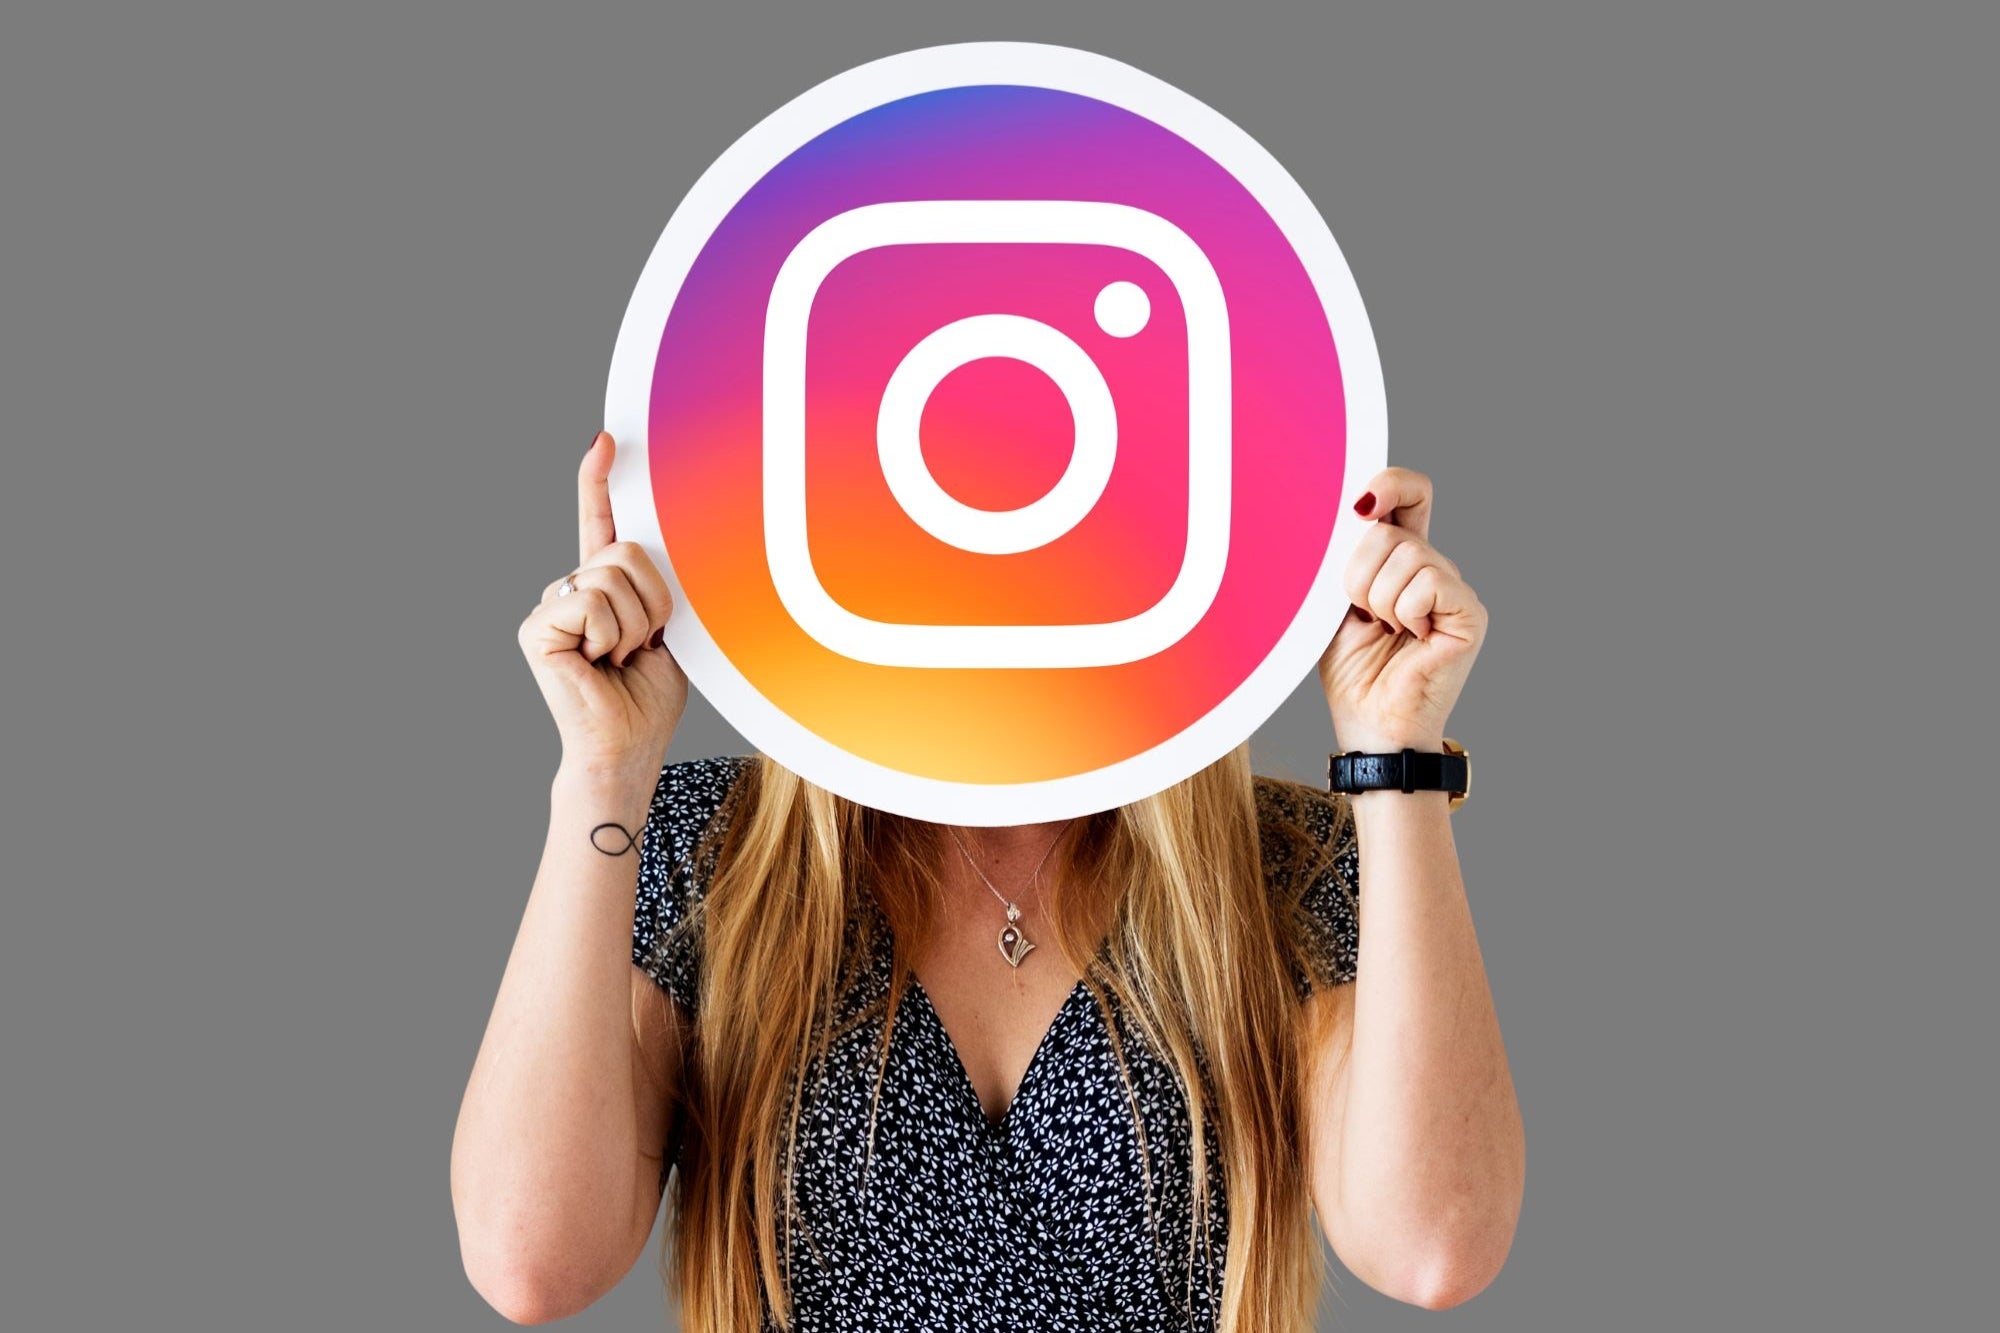 Instant Fame: Purchase Instagram Followers and Skyrocket Your Profile